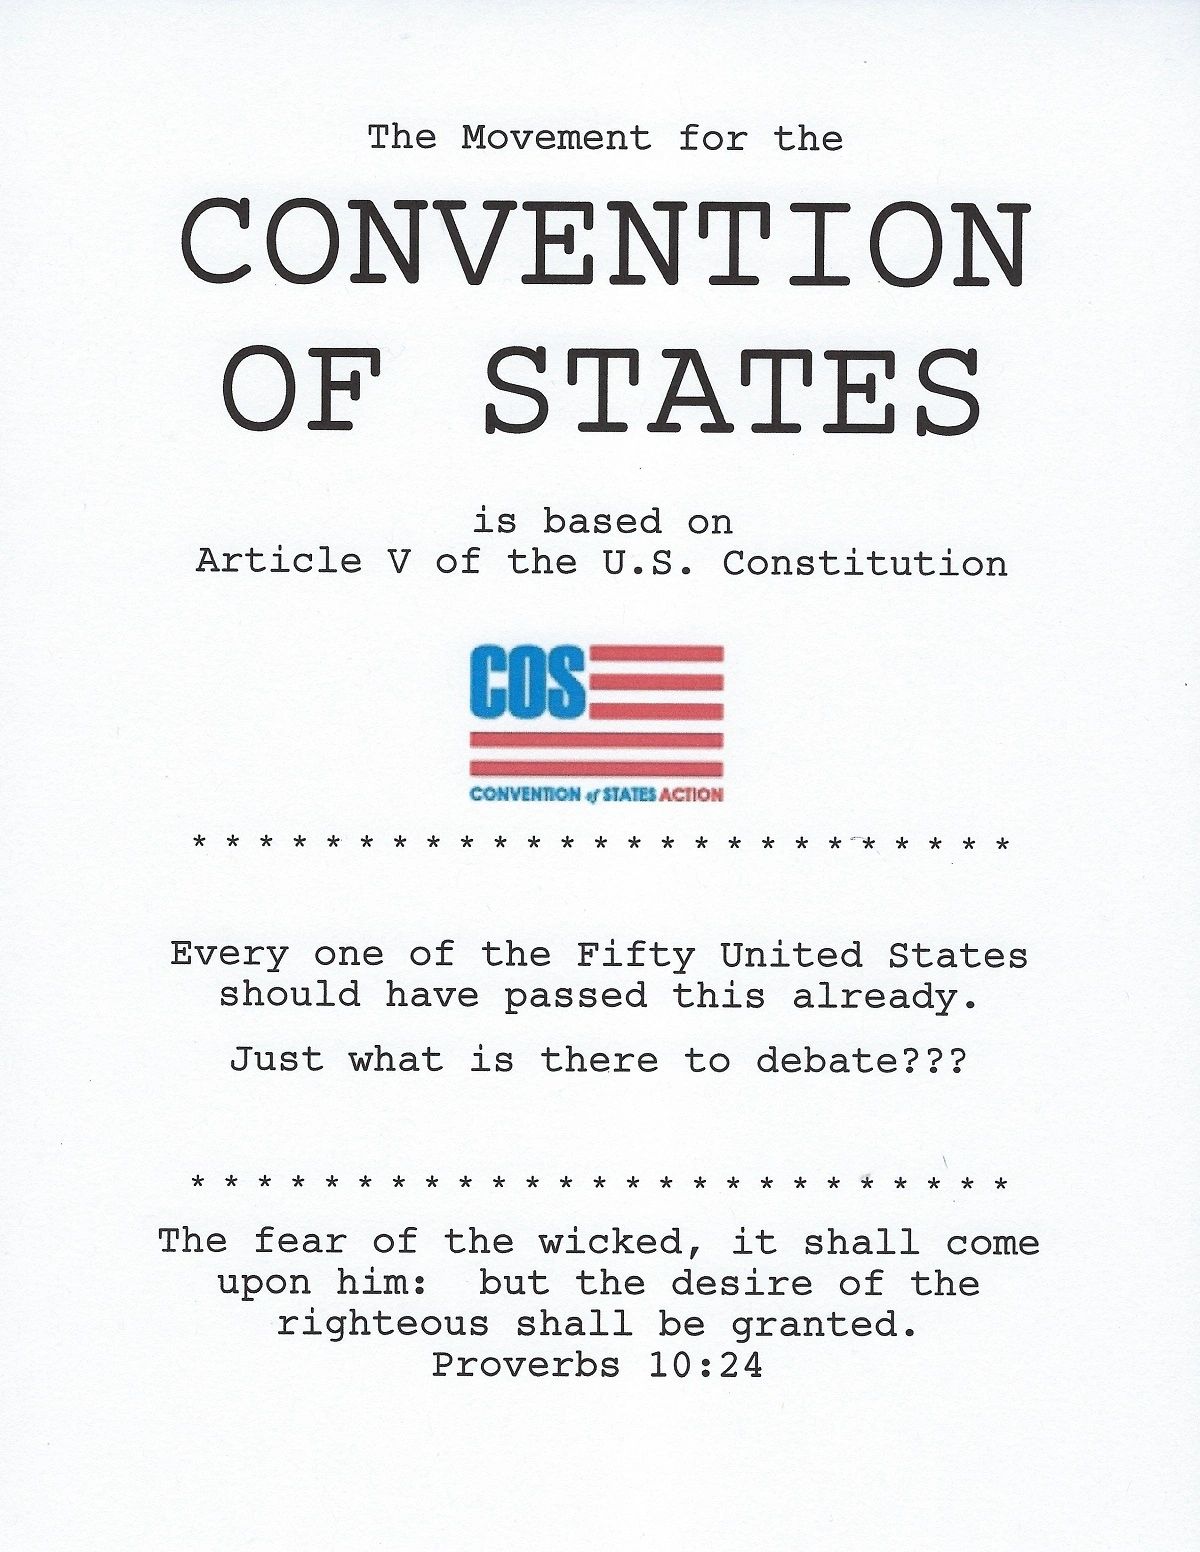 CONVENTION OF STATES